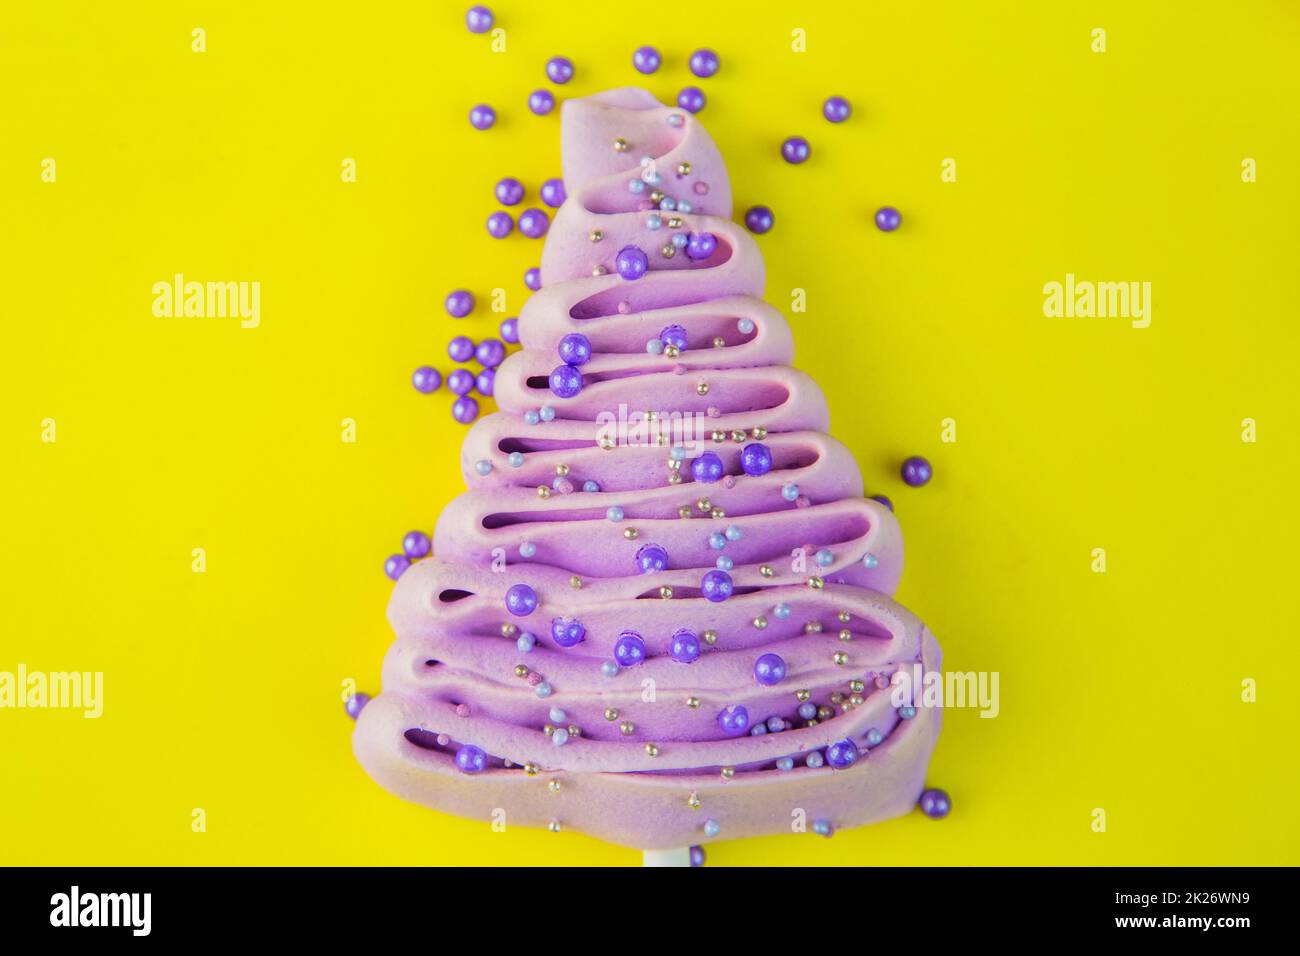 Pale purple Christmas tree made of meringue on a stick, decorated with purple and silver balls on a bright yellow background, purple powder balls are scattered near the tree. Stock Photo